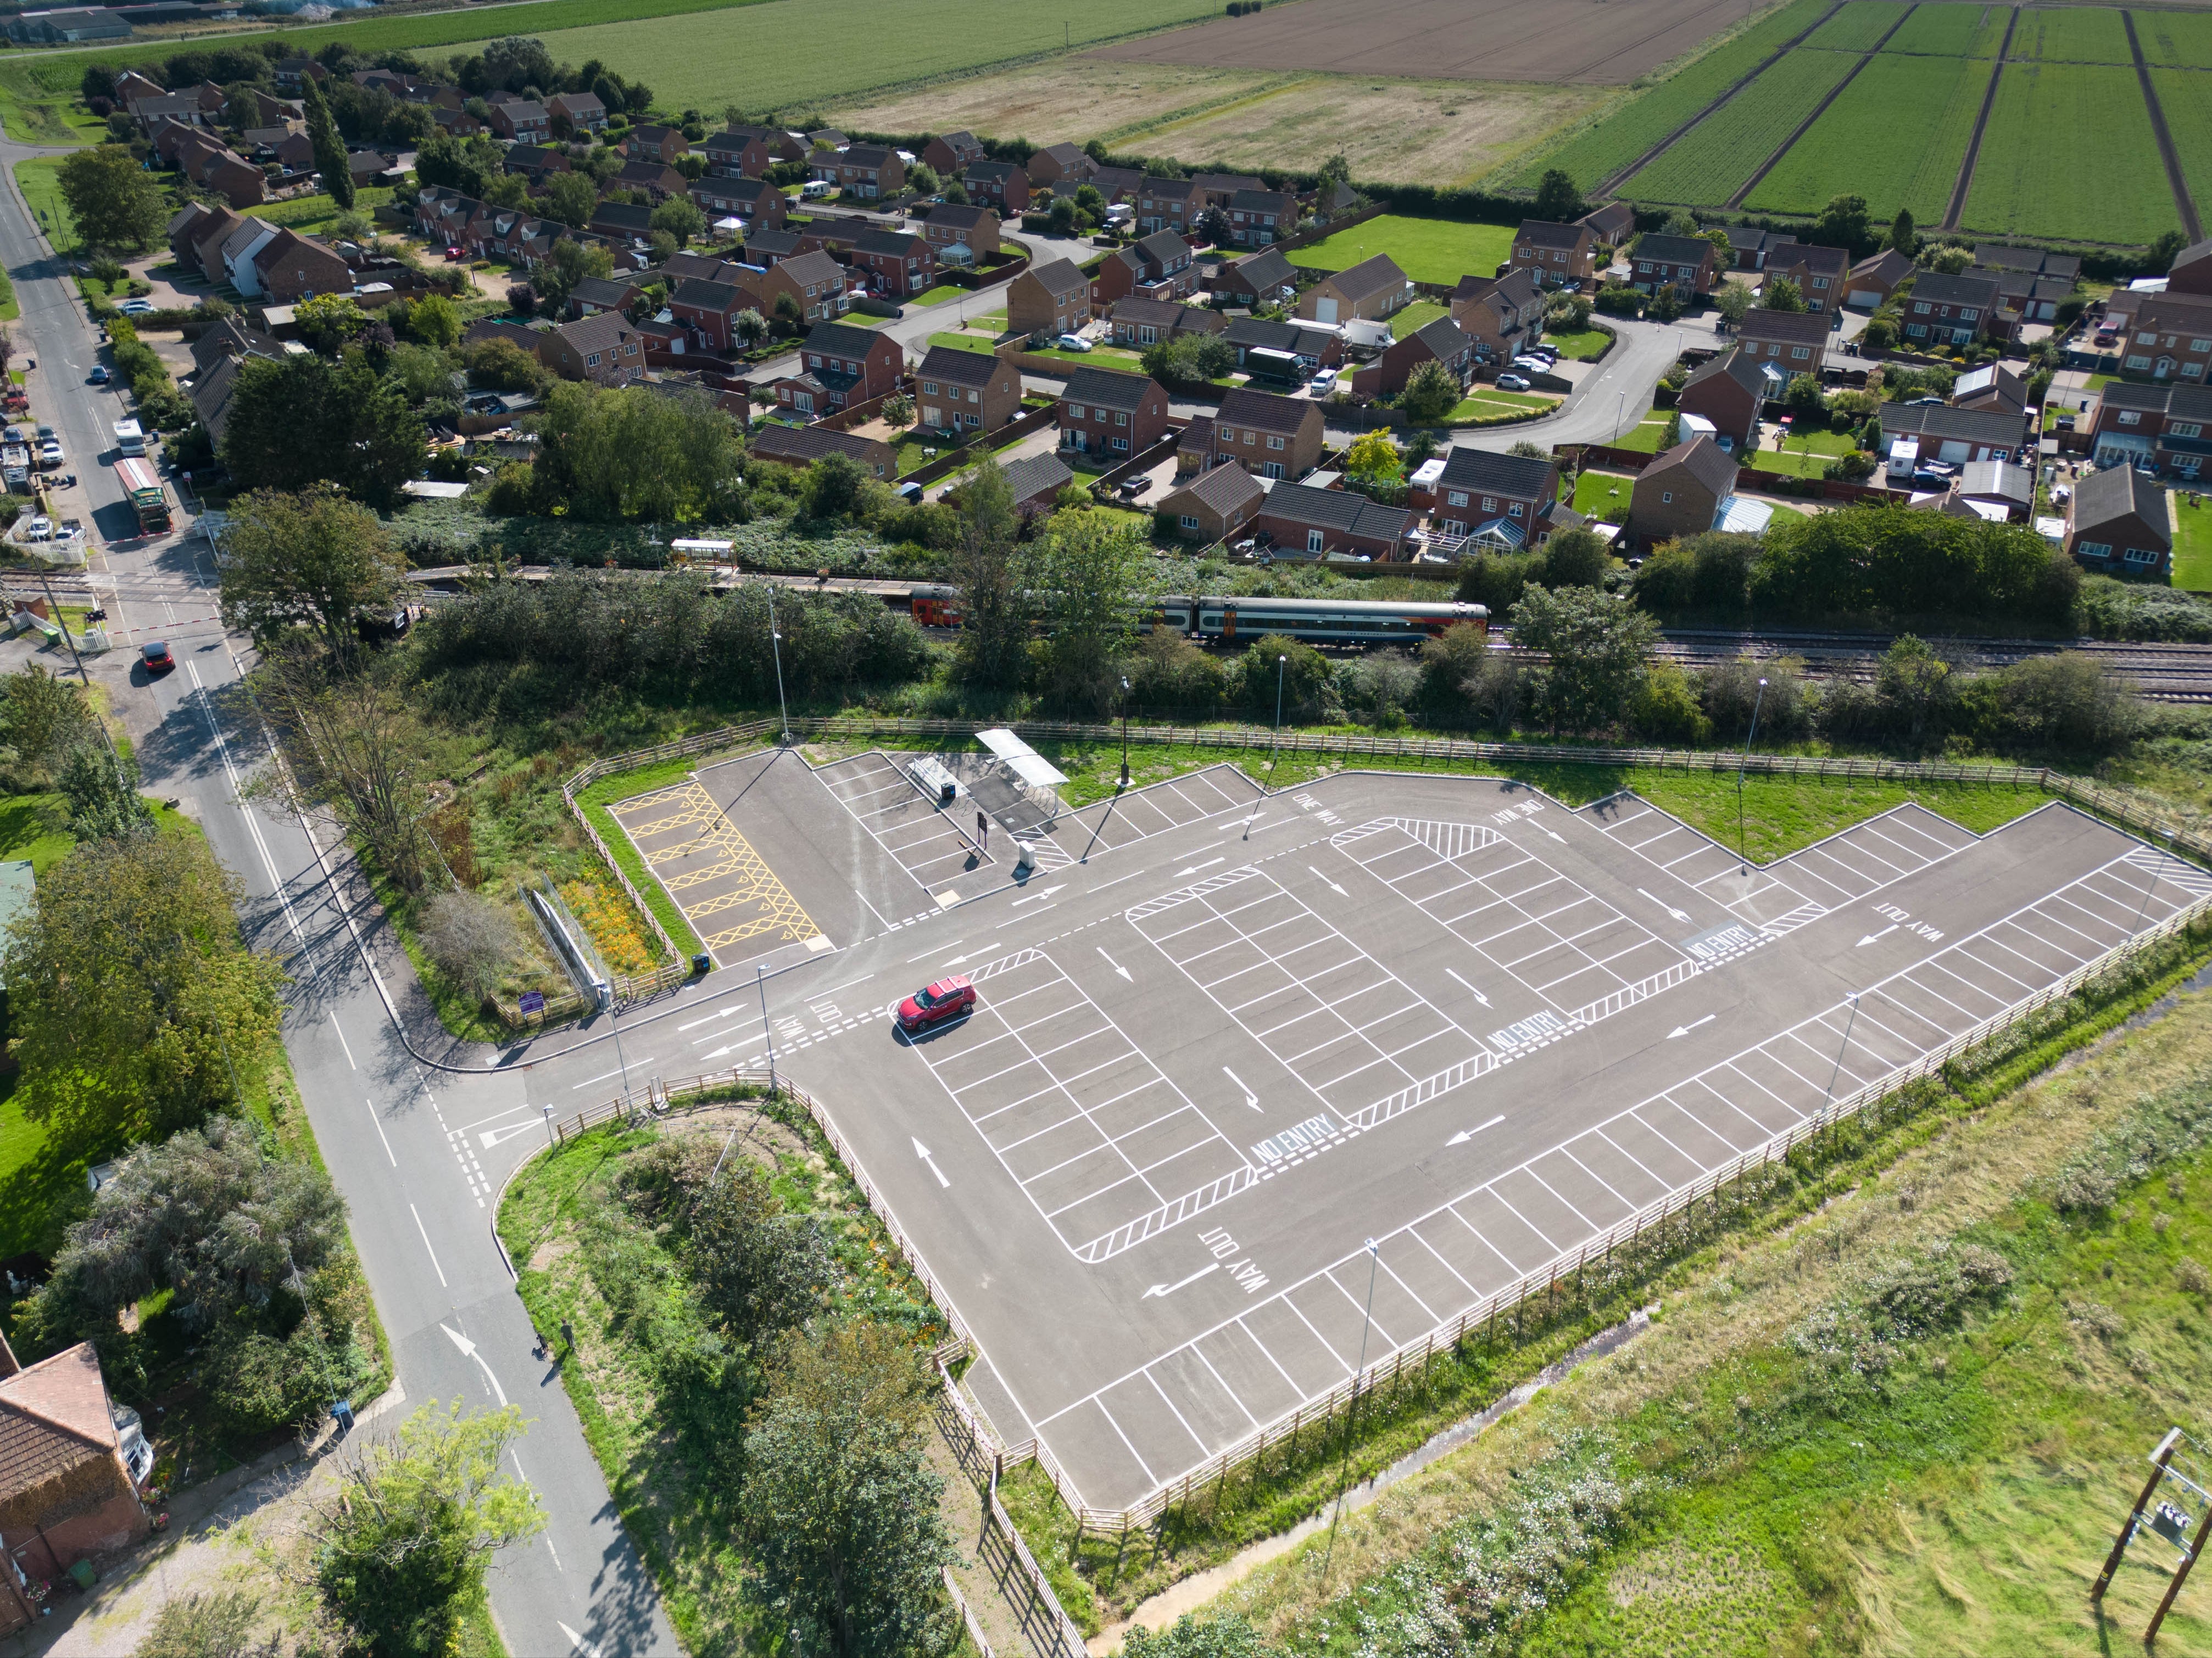 The car park was built in the small village as part of a £9.5m scheme by former Cambridgeshire and Peterborough Combined Authority Mayor James Palmer to improve Fenland rail stations